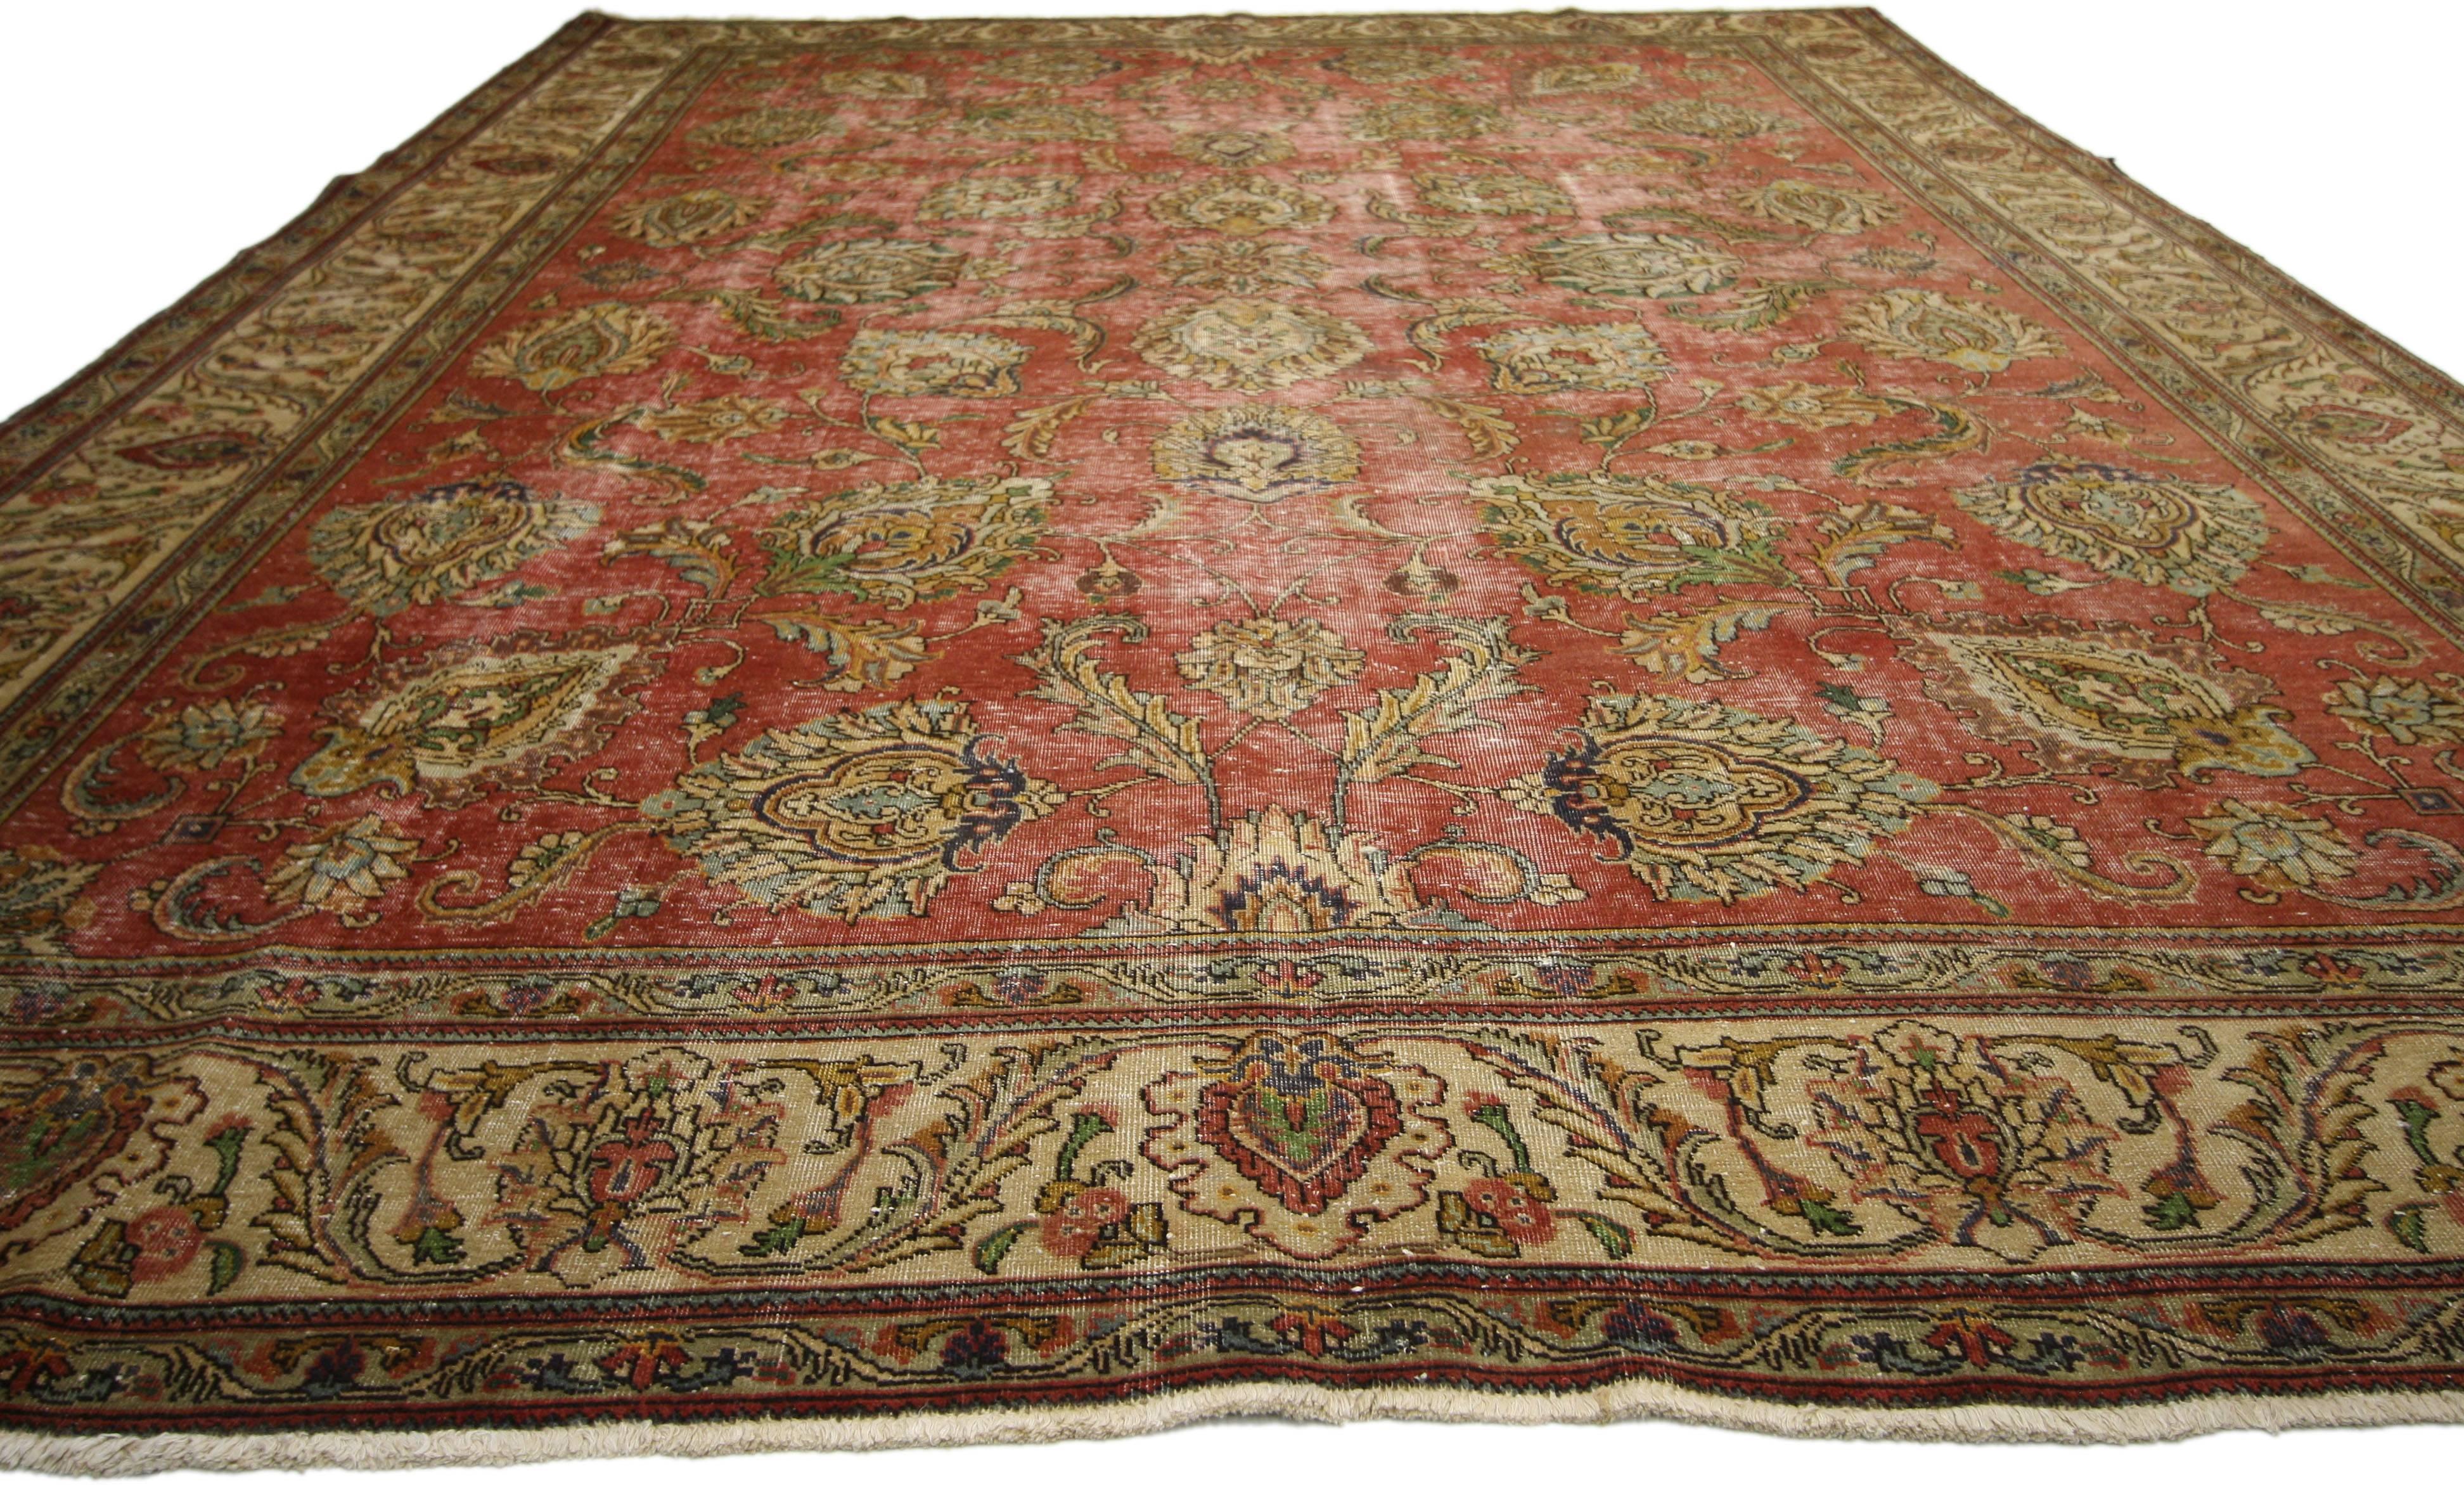 74329, distressed vintage Persian Tabriz rug with modern rustic Industrial style. This hand-knotted wool distressed vintage Persian Tabriz rug features an allover pattern surrounded by a classic border creating a well-balanced and timeless design.